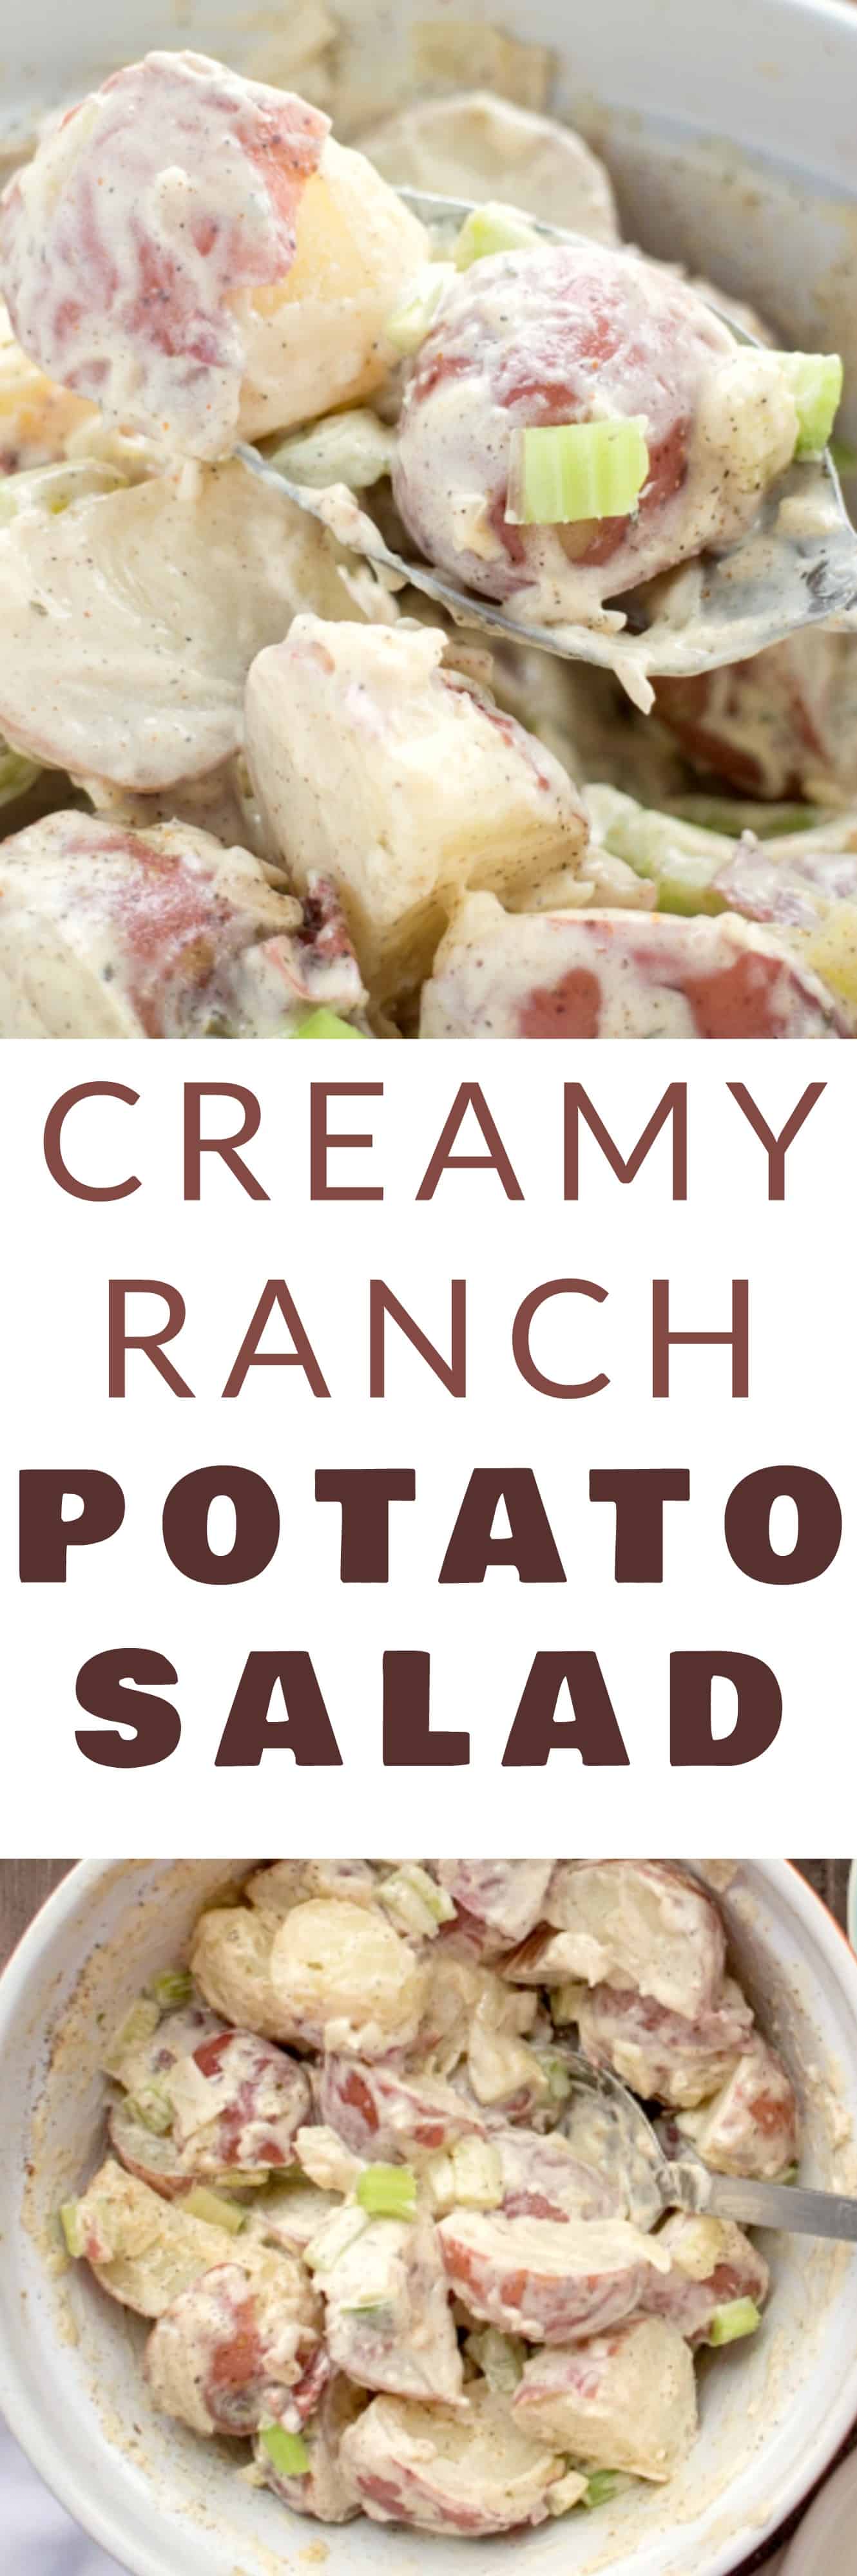 CREAMY No Mayo Potato Salad that doesn't require potato peeling! This loaded, easy to make potato salad recipe has the classic taste you grew up with and is ready in 20 minutes! It's made with ranch dressing (no mayo!) to make it extra creamy! Enjoy this warm in the Winter or chilled in the Summer! It's a must have your next grilling session!